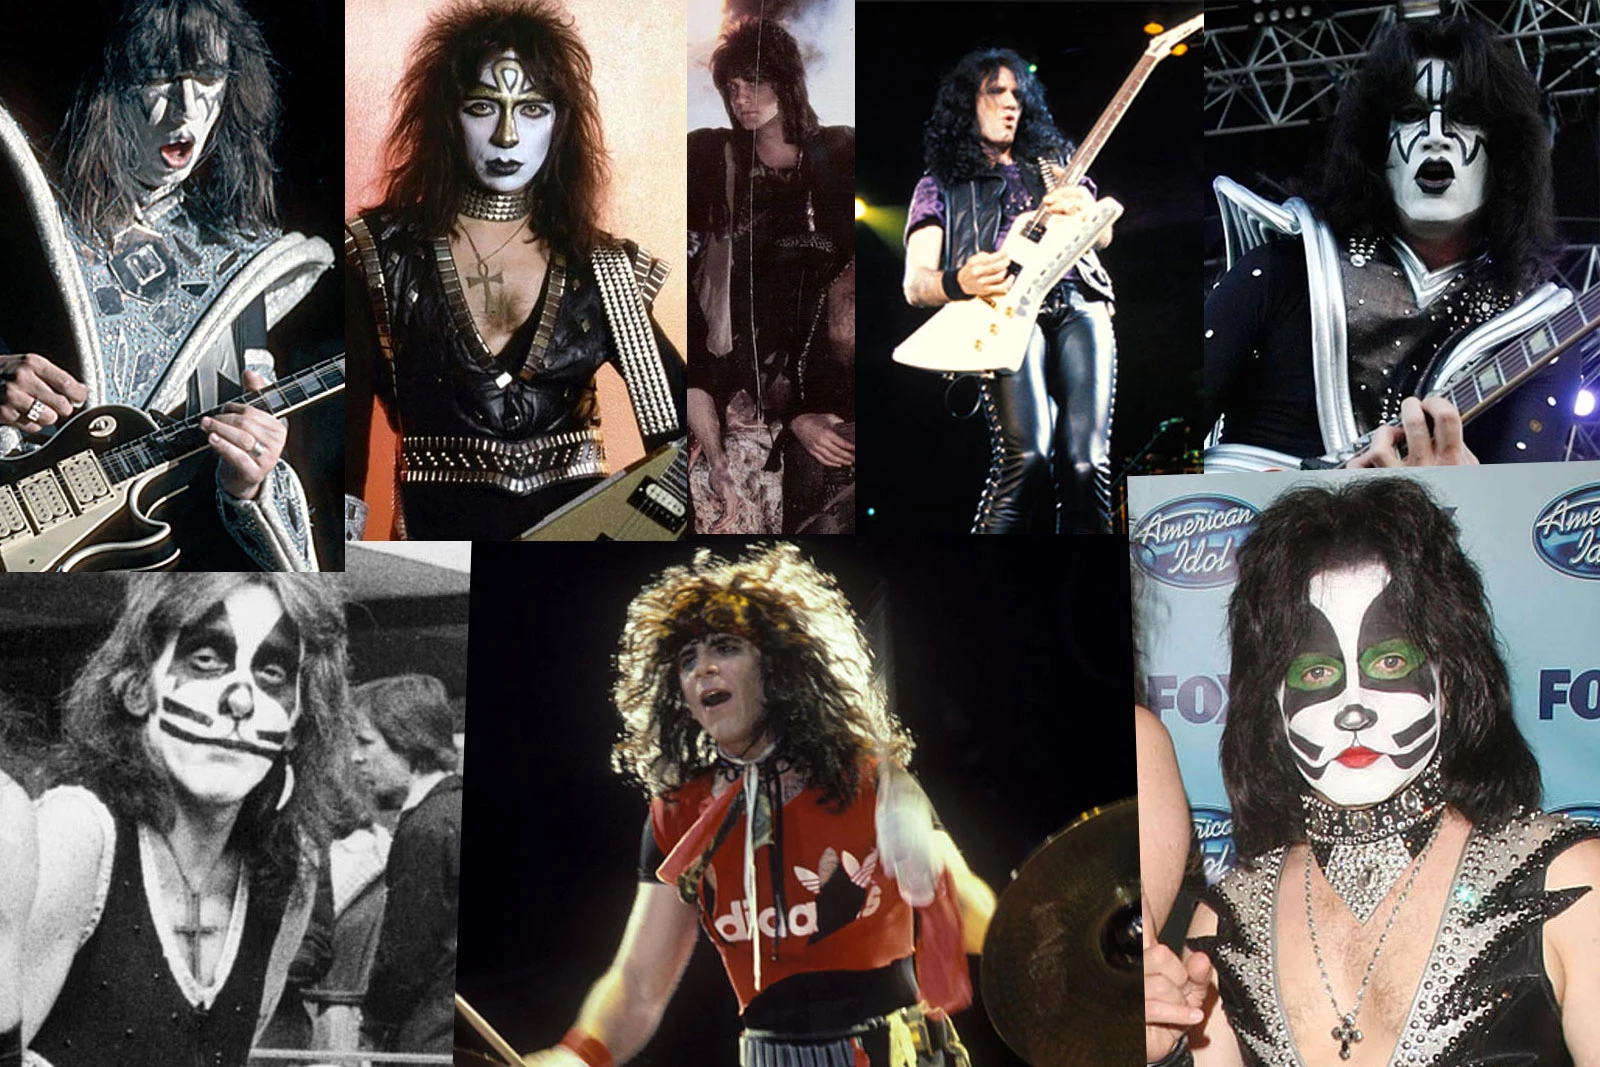 Who's Played the Most Kiss Shows? Lead Guitar and Drummer Totals